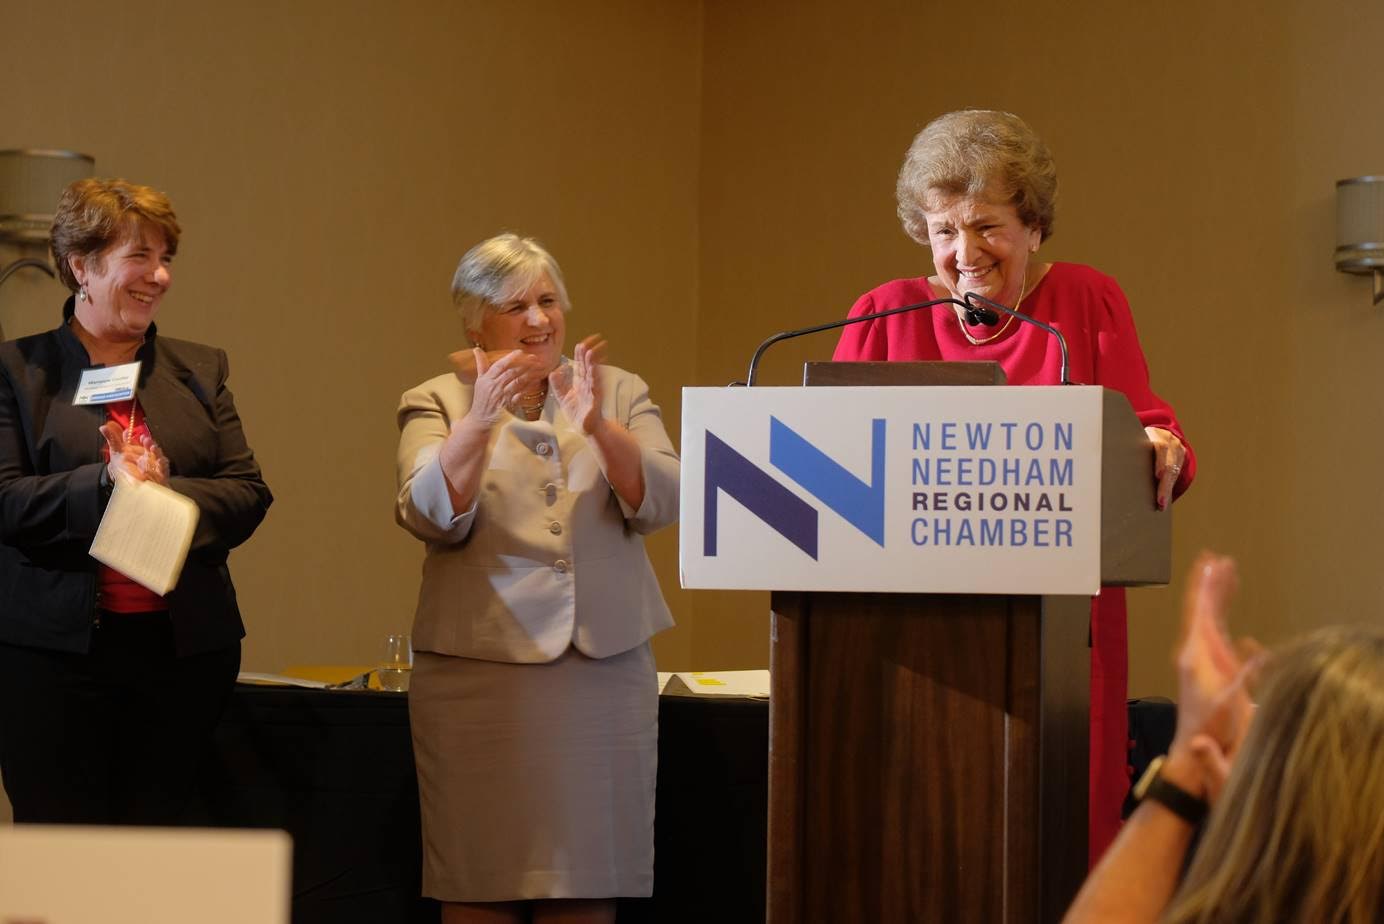 Louise Condon accepts the Newton-Needham Regional Chamber’s honor for decades of unparalleled service to the town at the First Annual Needham Night dinner Jan. 31 at the Sheraton. The award was presented by, from left, Needham Select Chair Marianne Cooley and State Rep. Denise Garlick. Photos by Bob Keene 